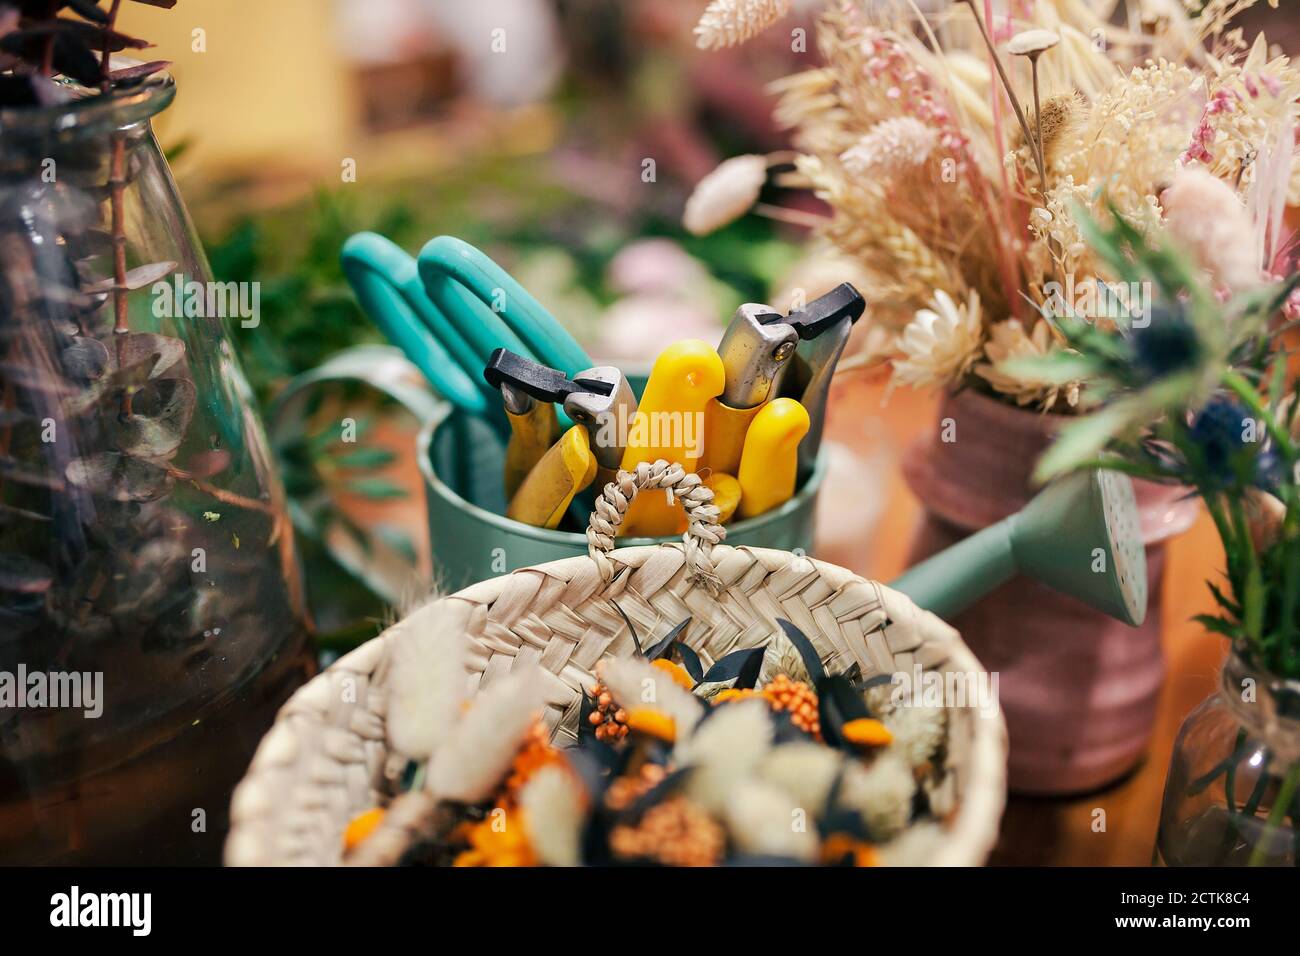 Gardening tool and flowers kept on table at flower shop Stock Photo